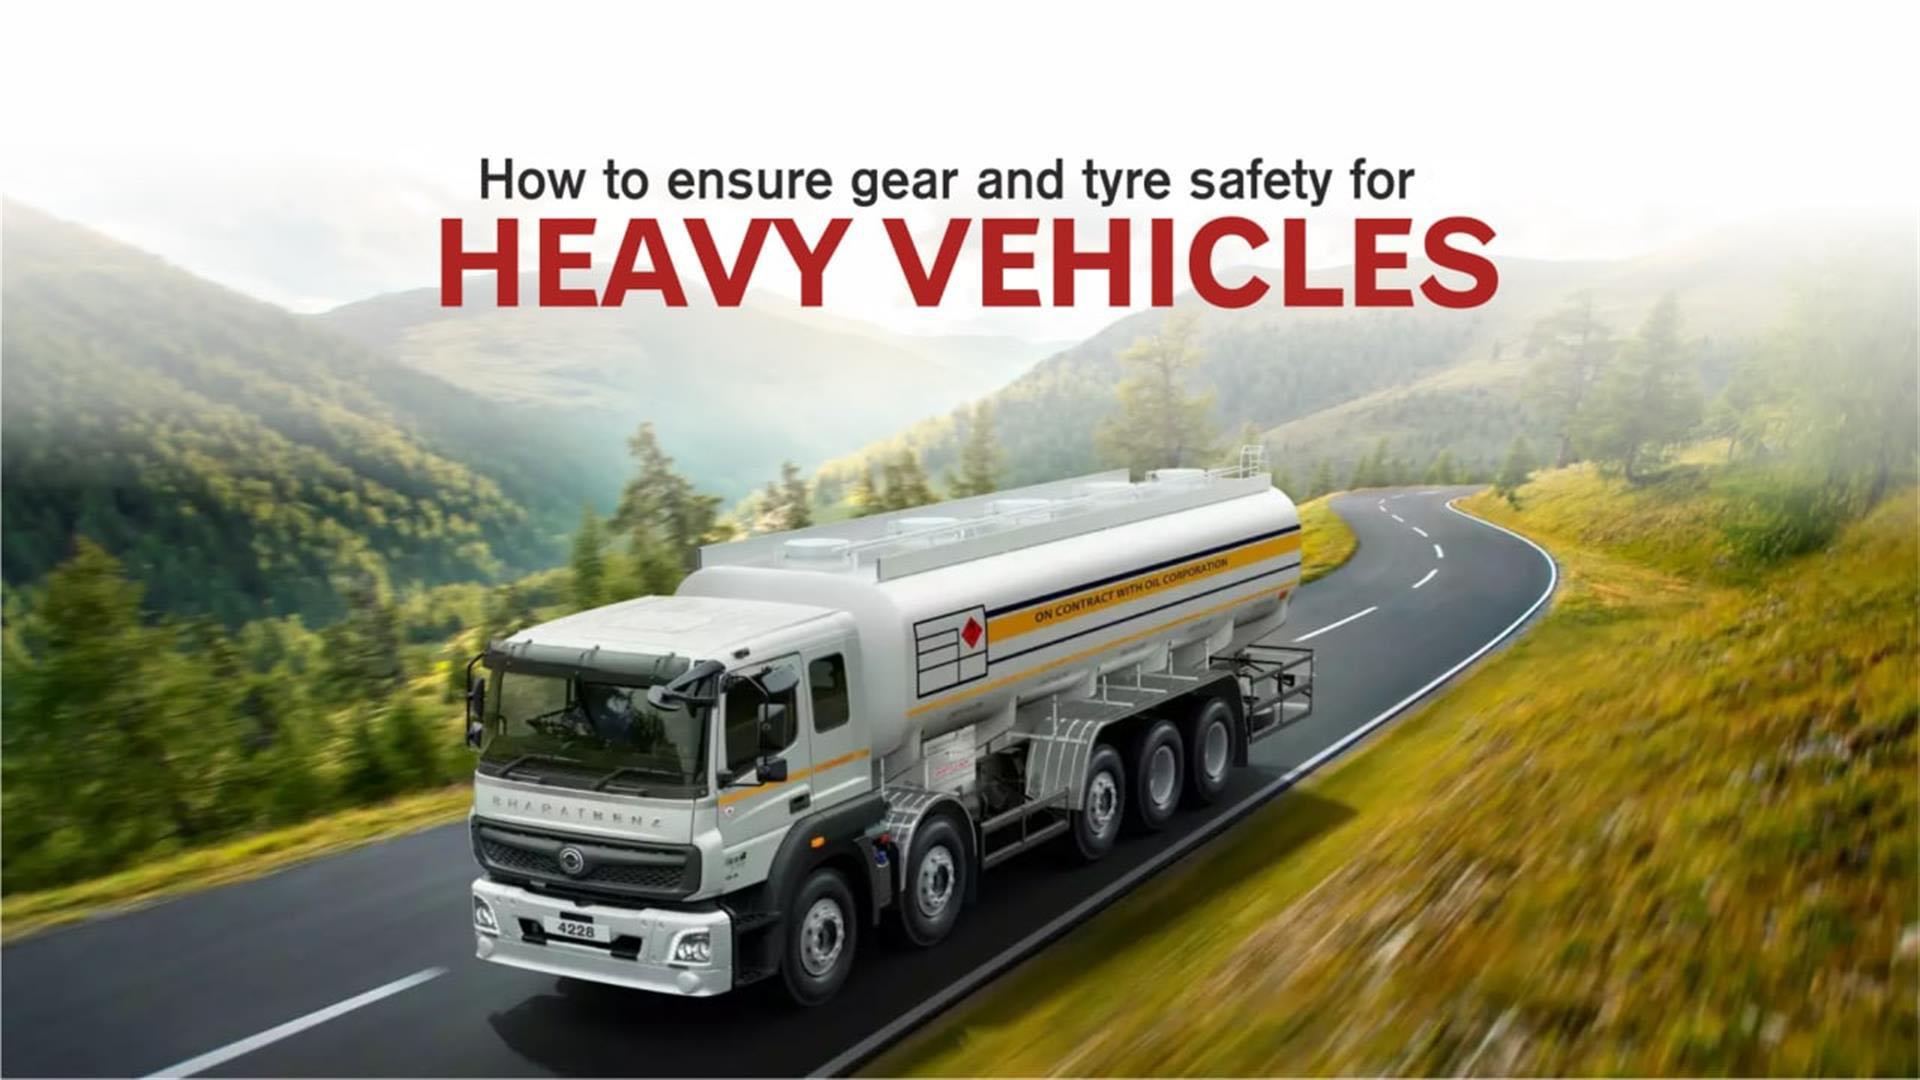 How to ensure gear and tyre safety for heavy vehicle?